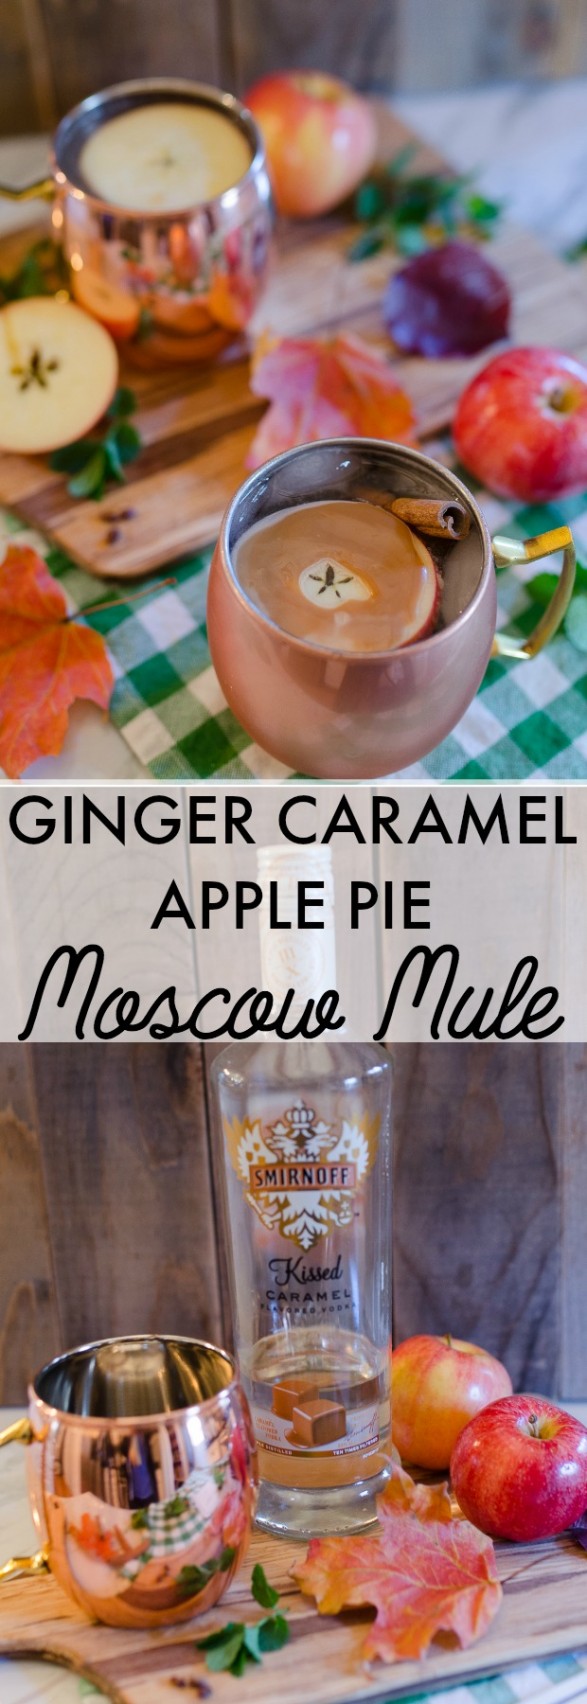 ginger caramel apple pie moscow mule recipe